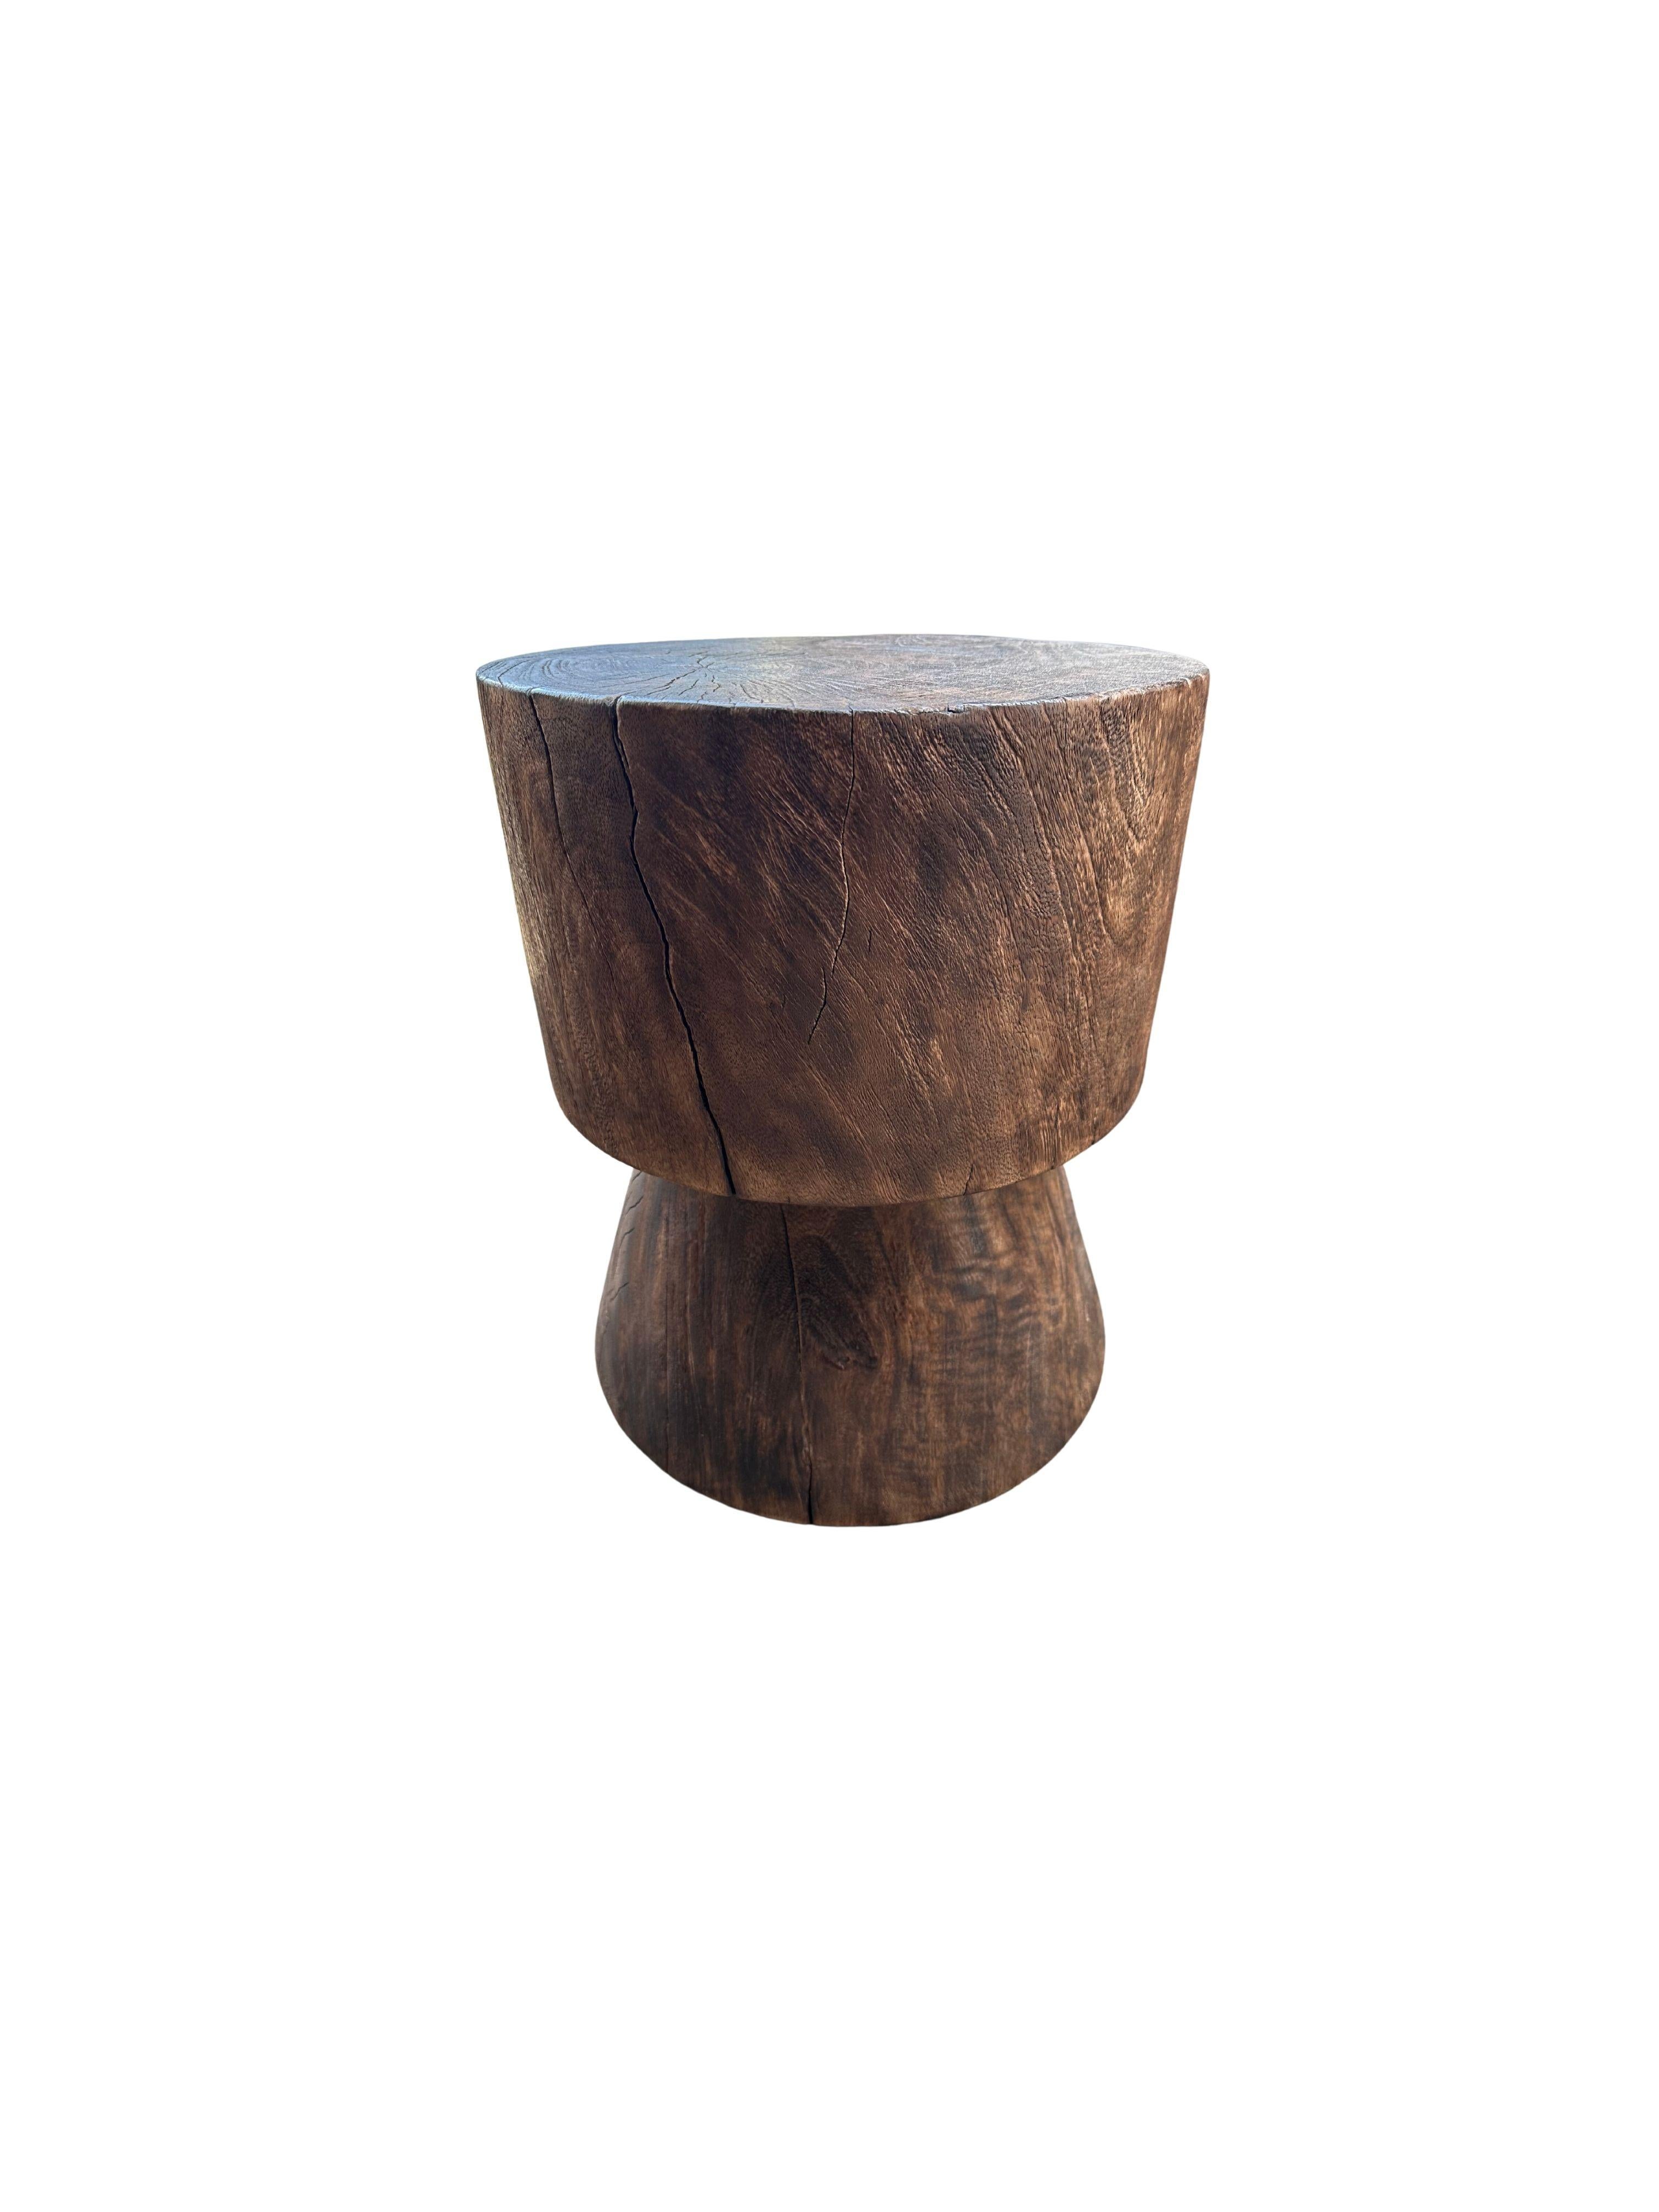 A wonderfully sculptural round side table. Its neutral pigments make it perfect for any space. A uniquely sculptural and versatile piece certain to invoke conversation. It was crafted from a solid block of mango wood and has a smooth texture